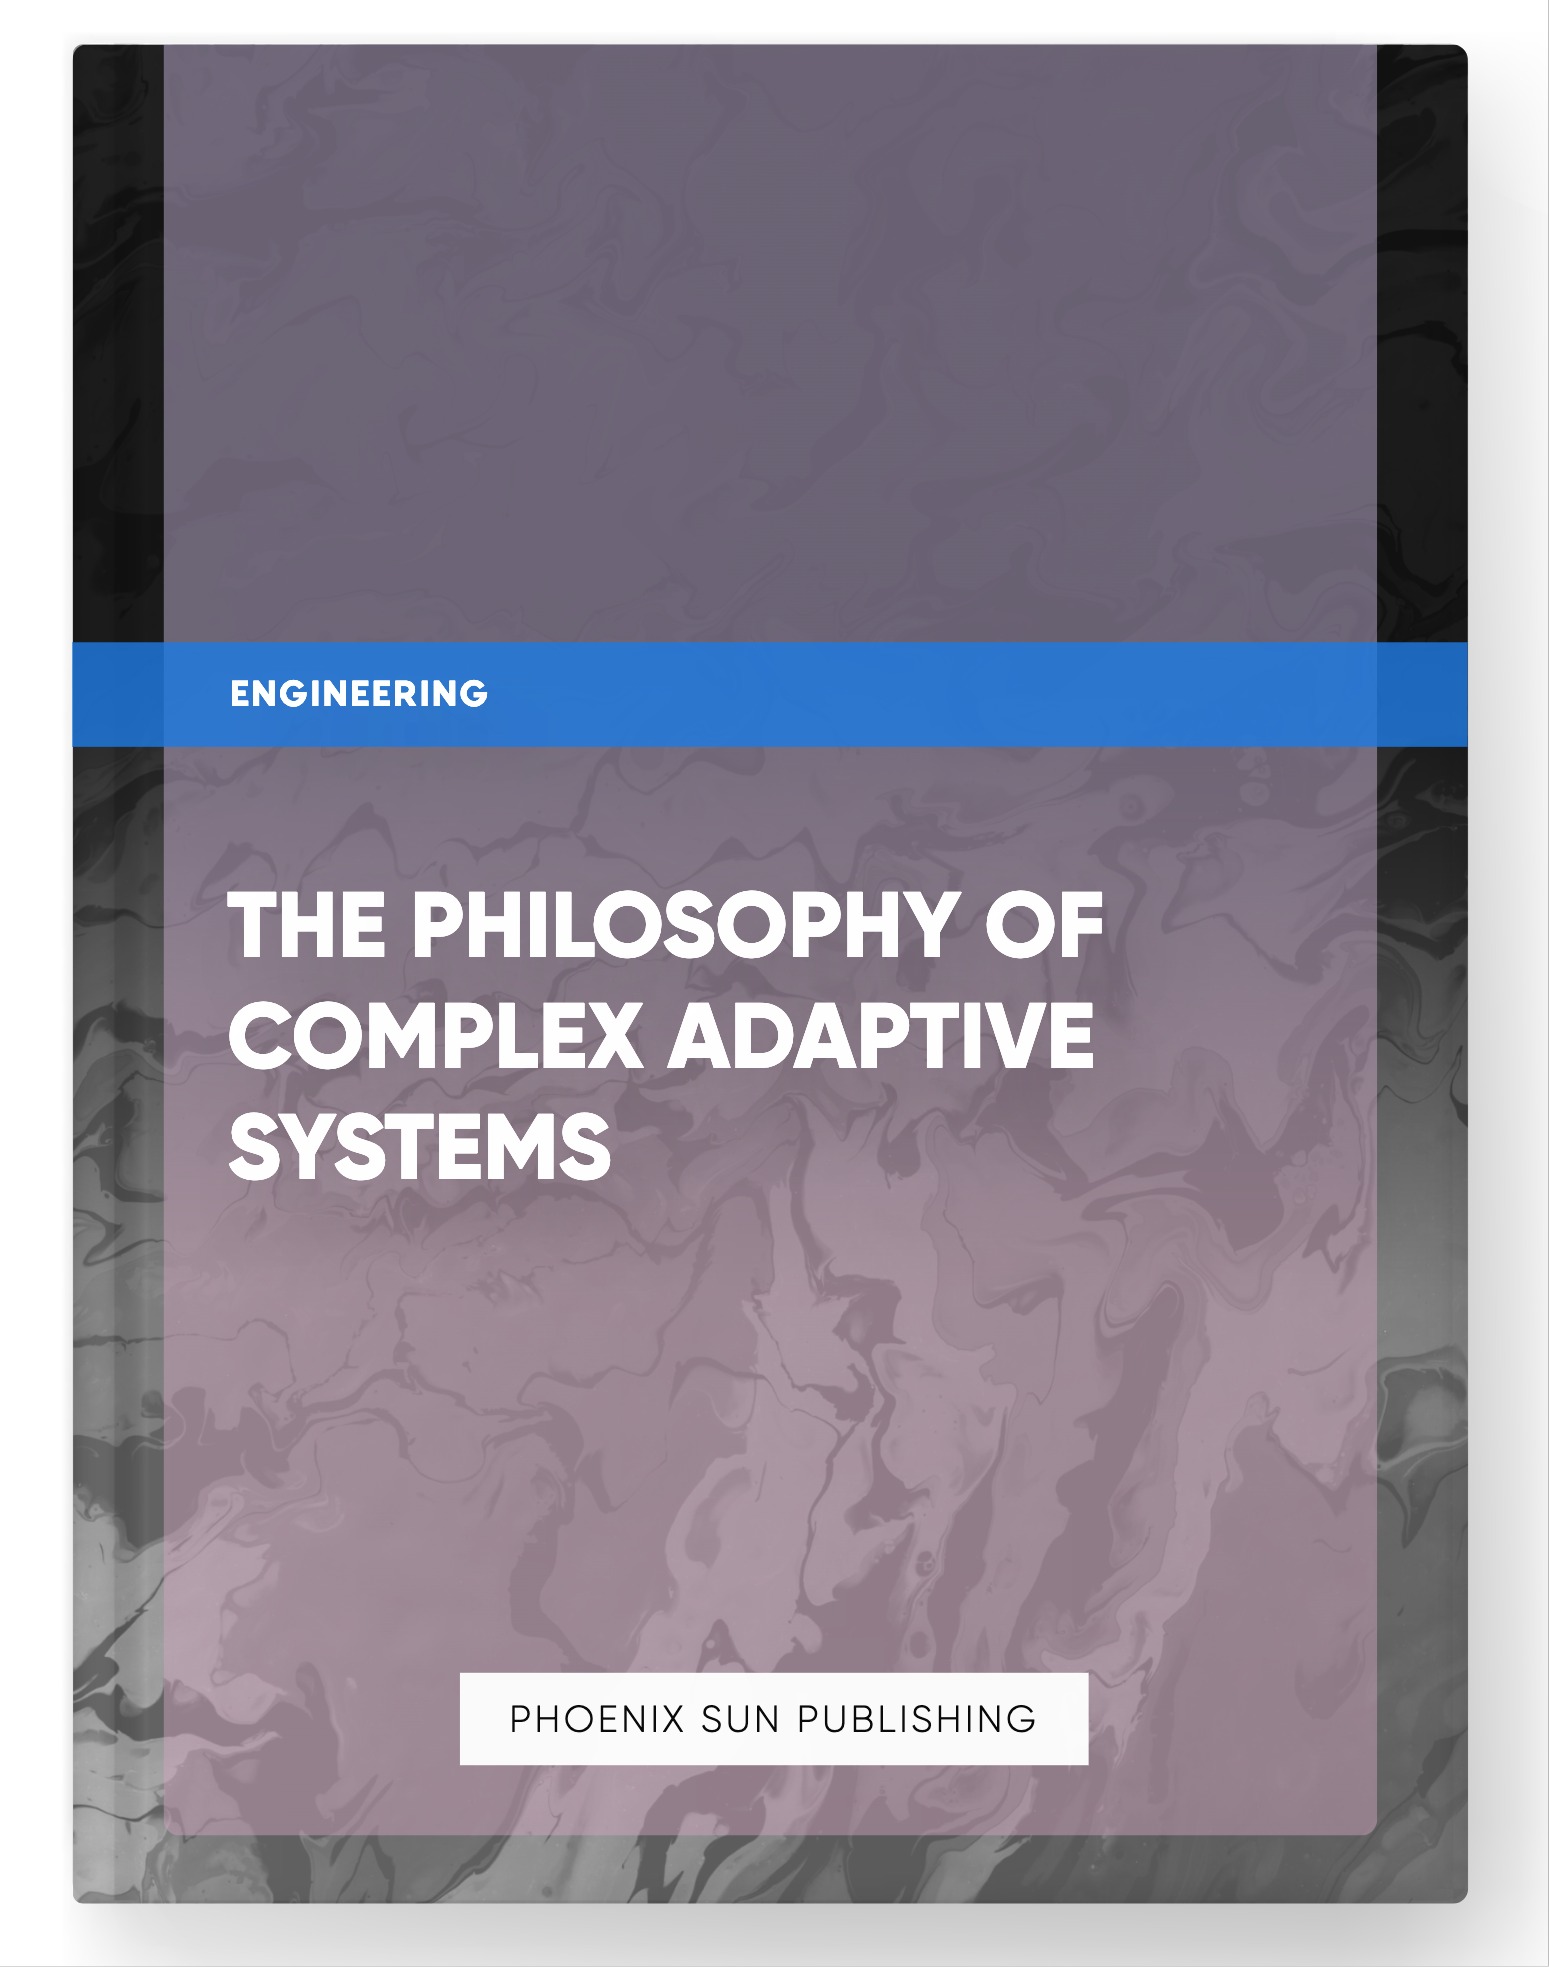 The Philosophy of Complex Adaptive Systems